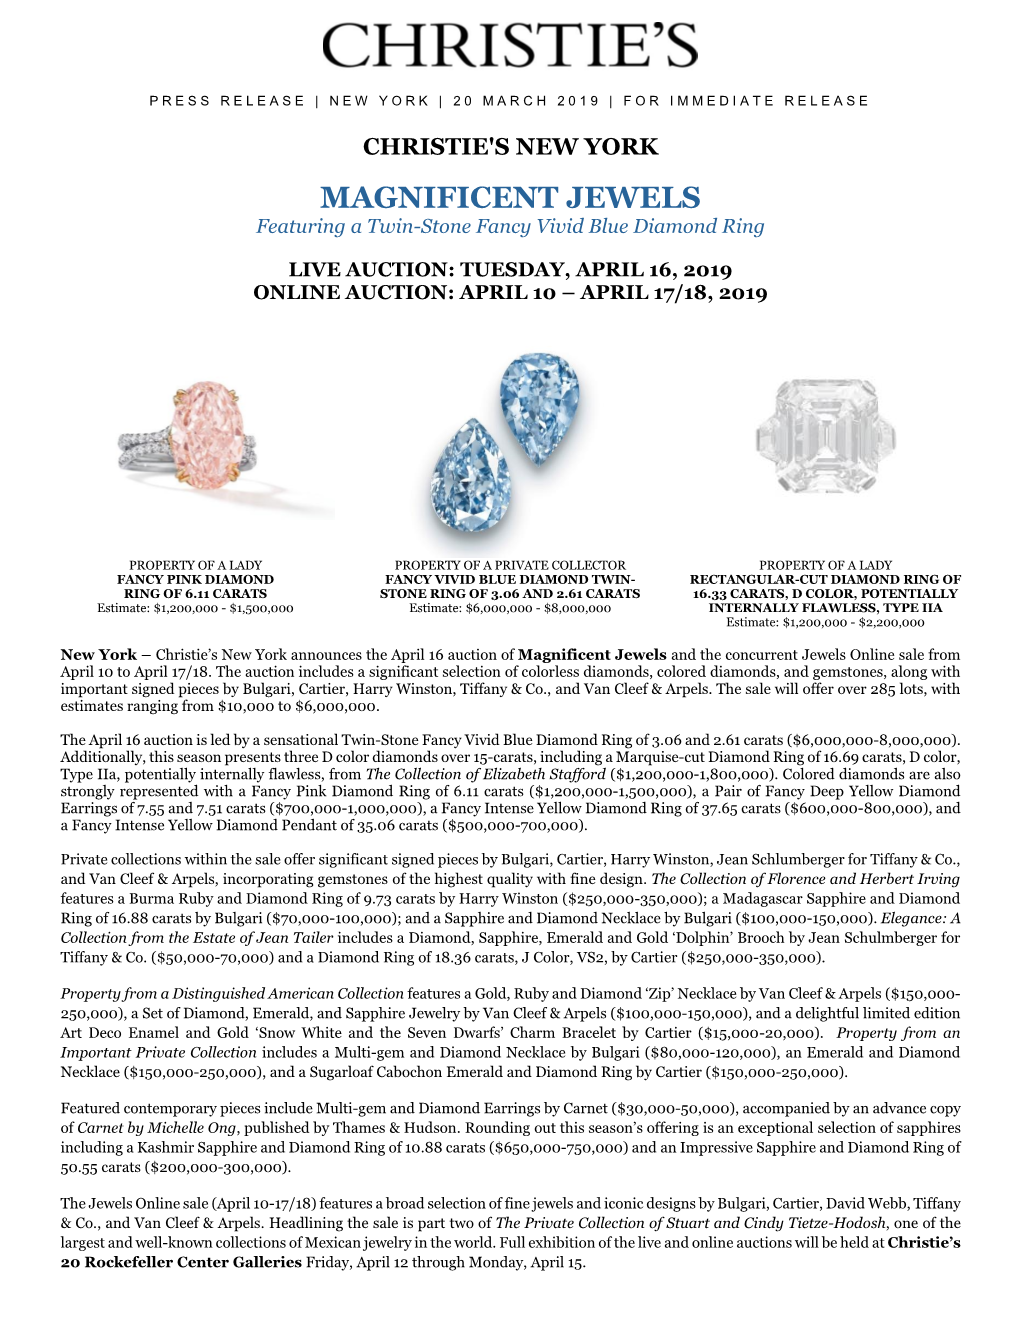 MAGNIFICENT JEWELS Featuring a Twin-Stone Fancy Vivid Blue Diamond Ring